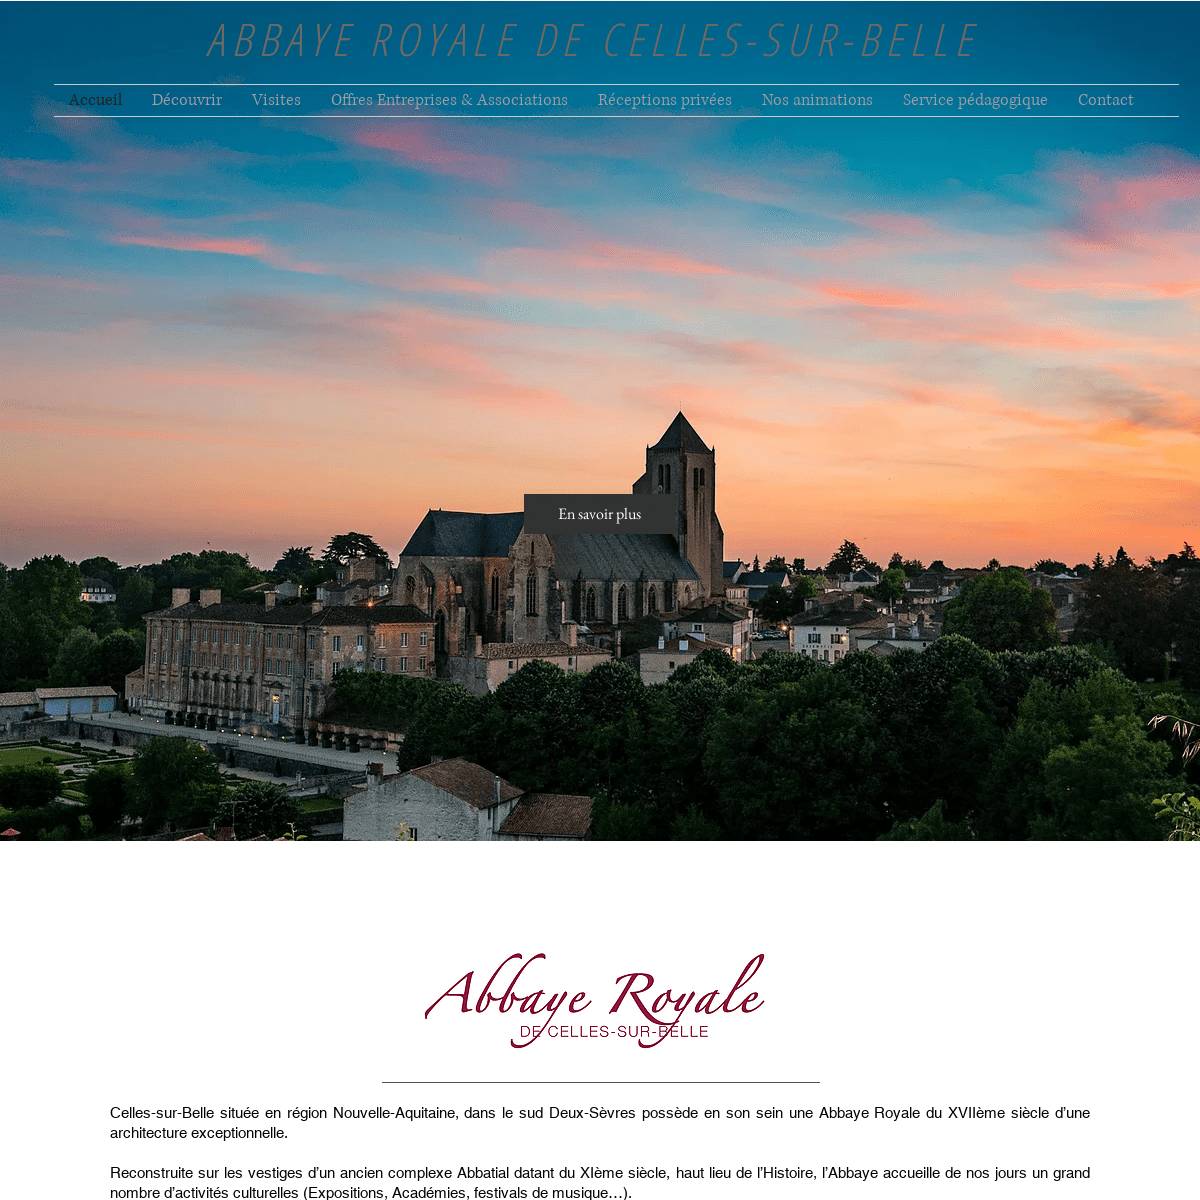 A complete backup of abbaye-royale-celles.com